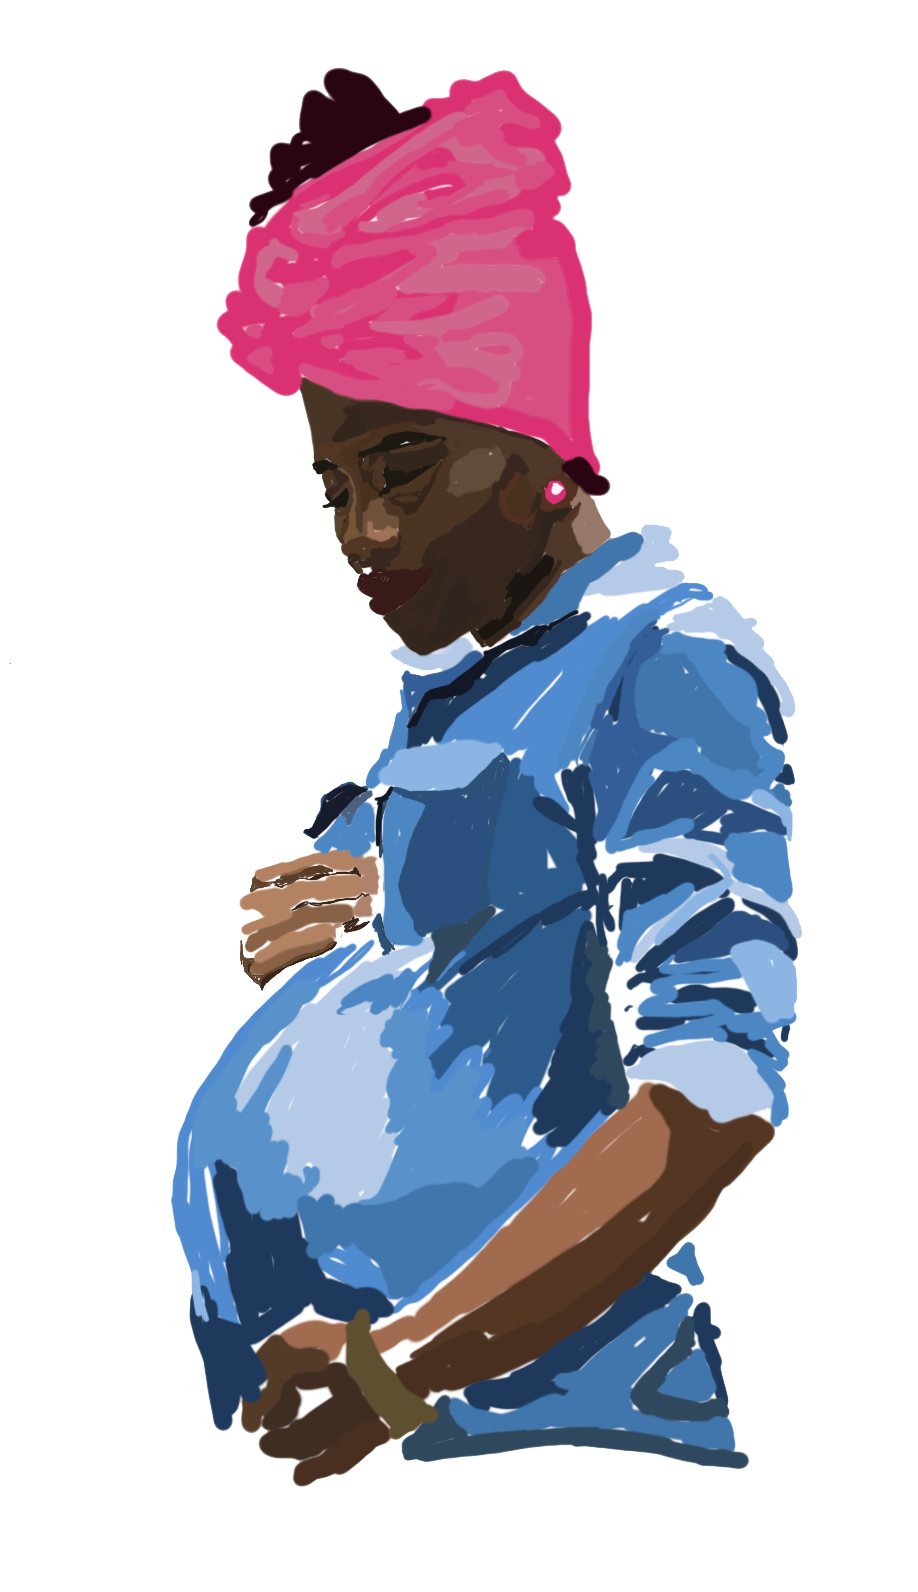 Illustration of a pregnant woman wearing a blue shirt and a pink headwrap